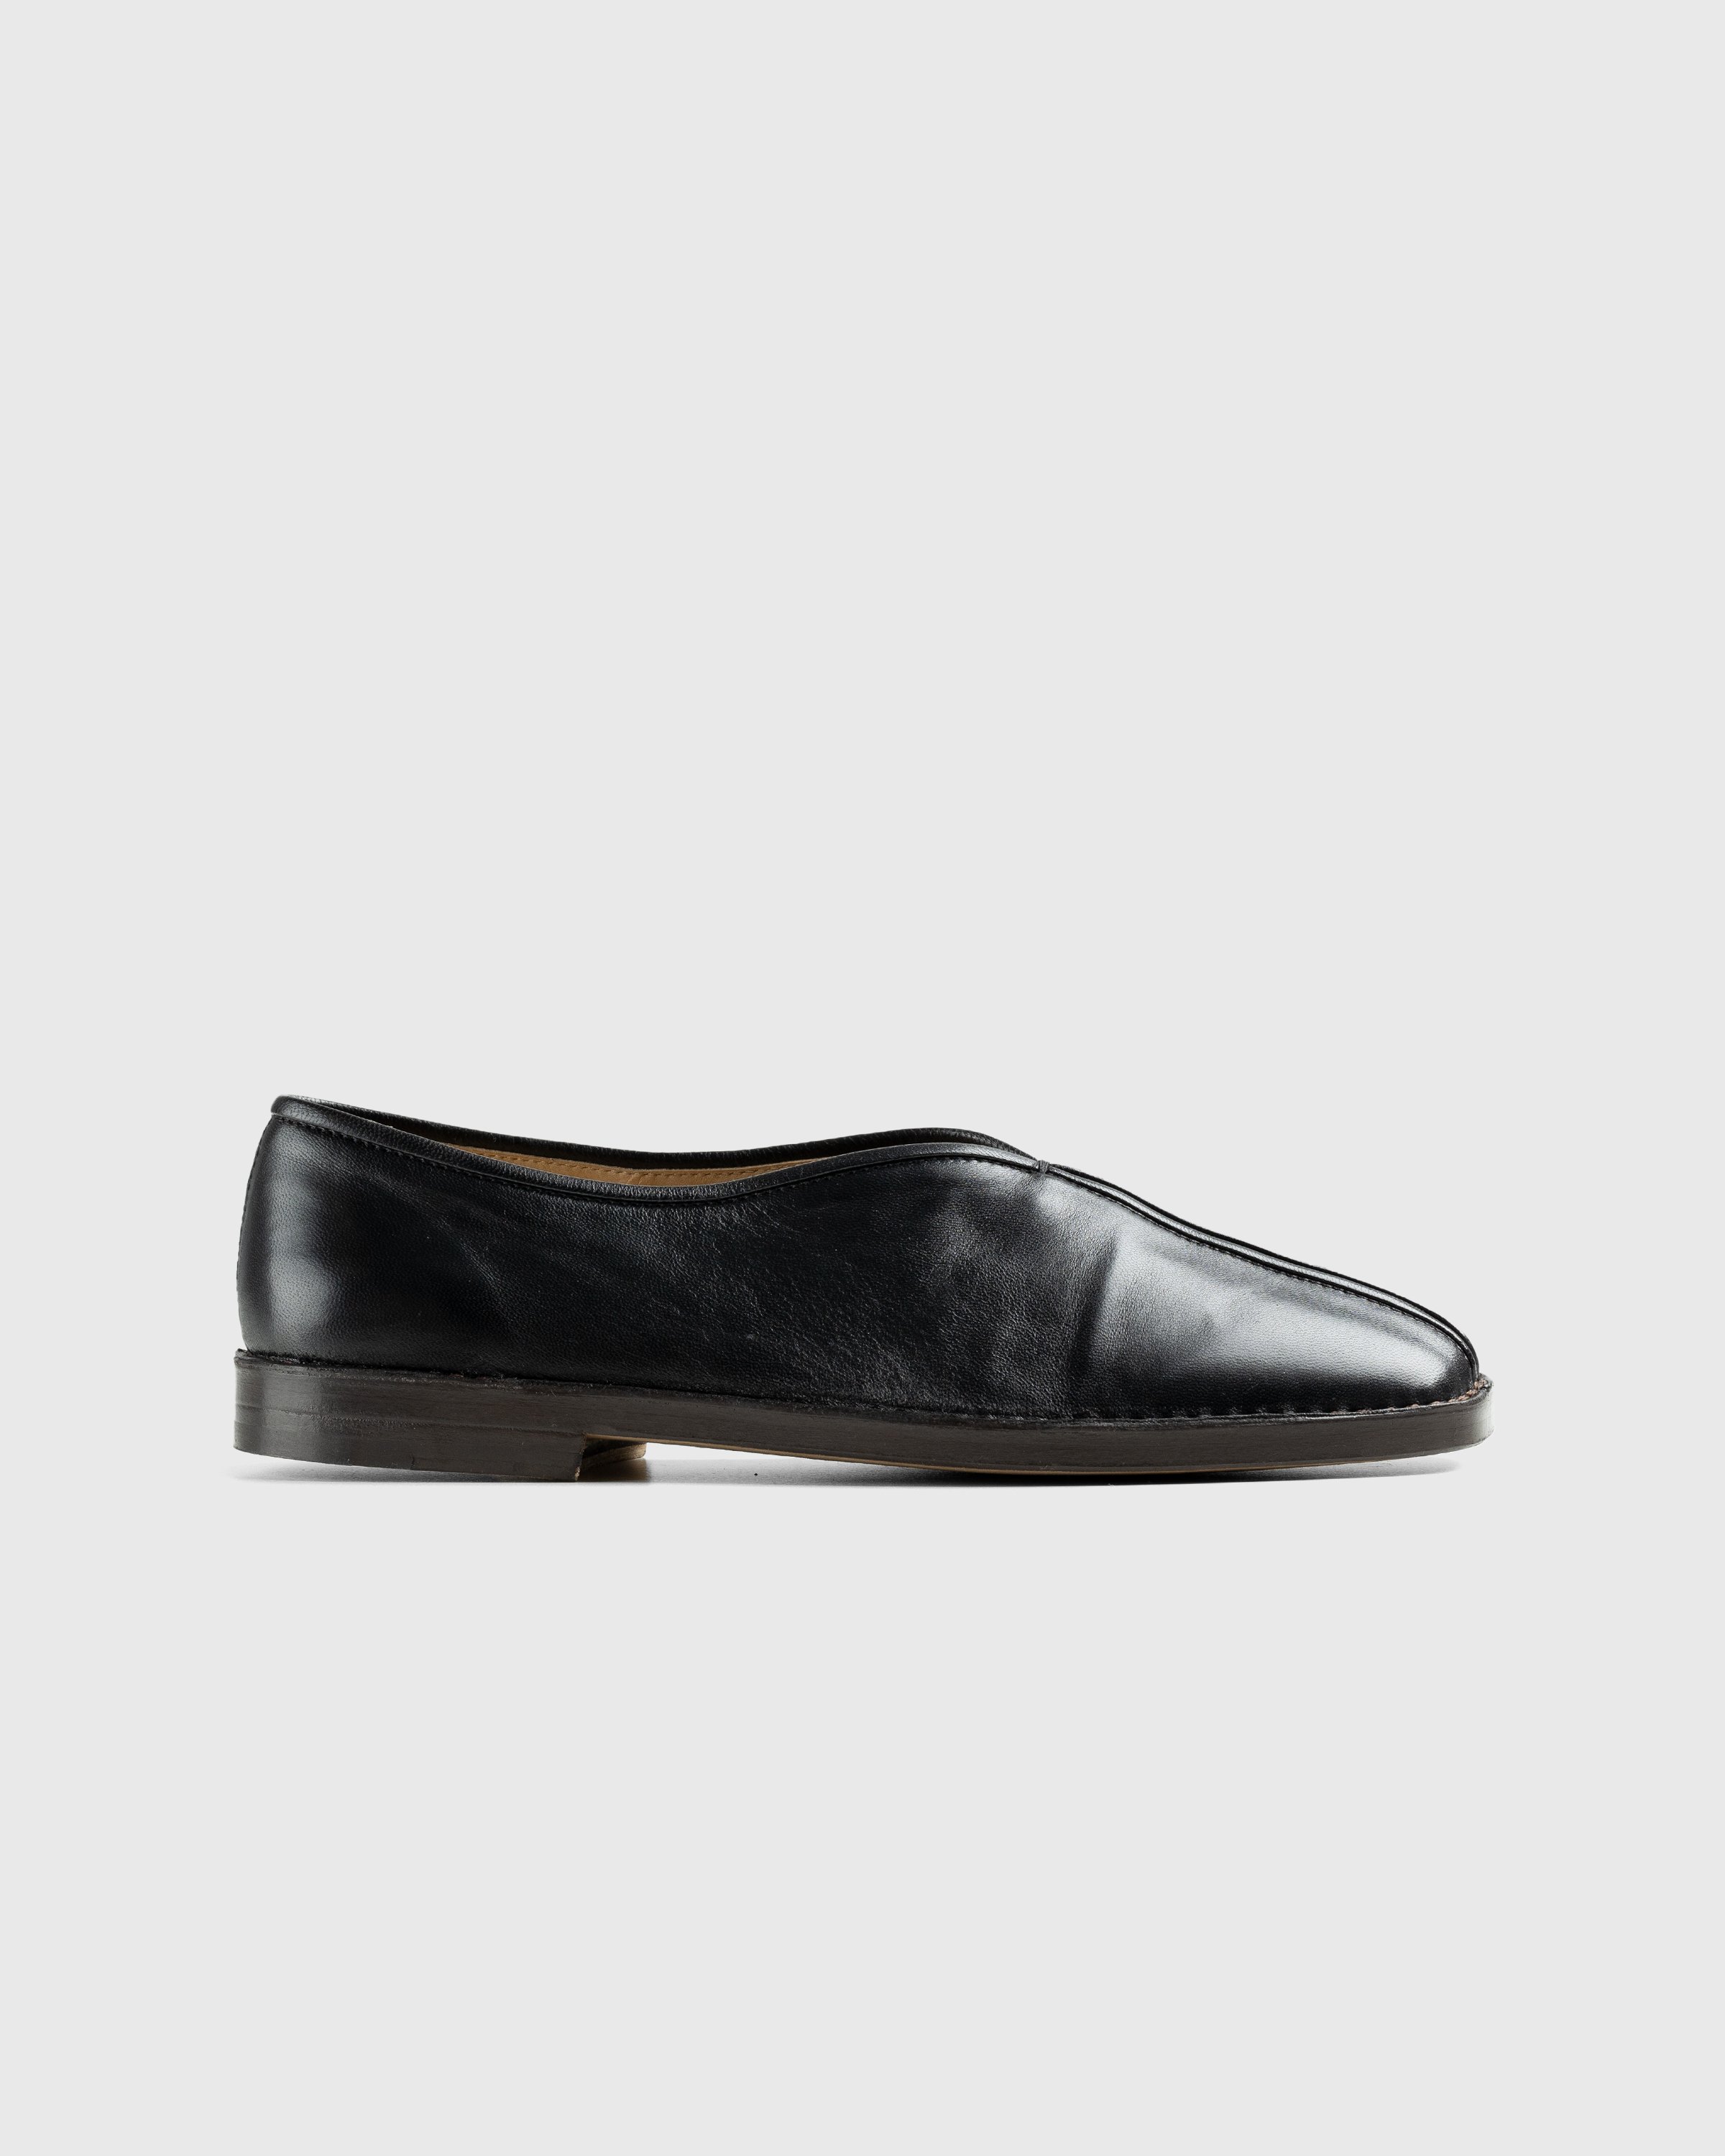 Lemaire - Flat Piped Slippers - Footwear - Black - Image 1